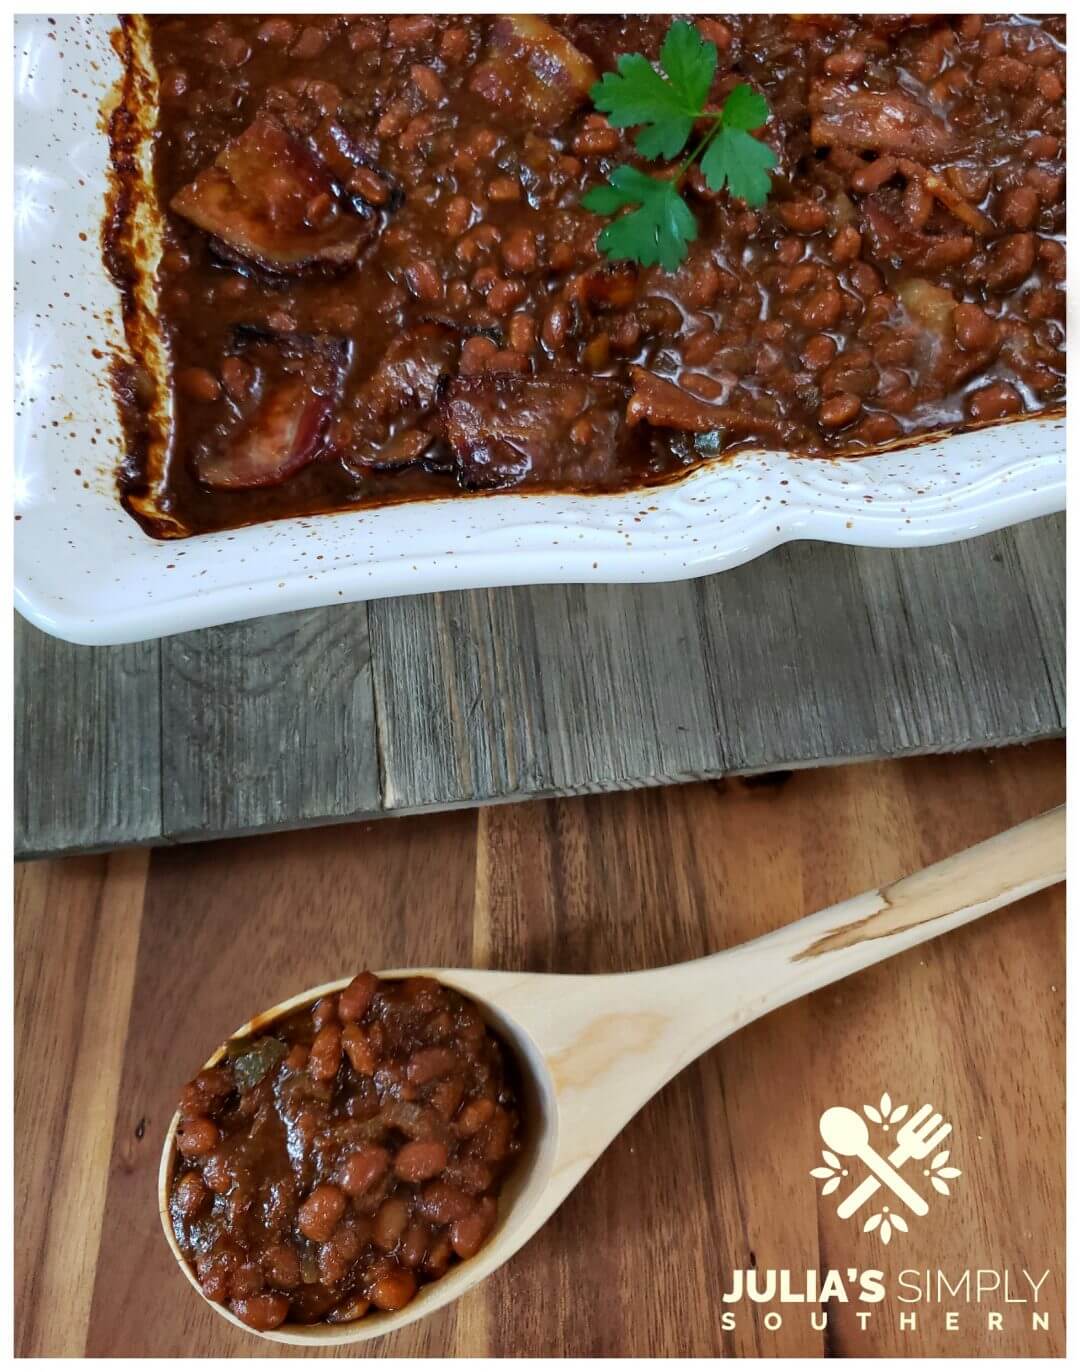 Best Southern Style Baked Beans Recipe - Julias Simply Southern